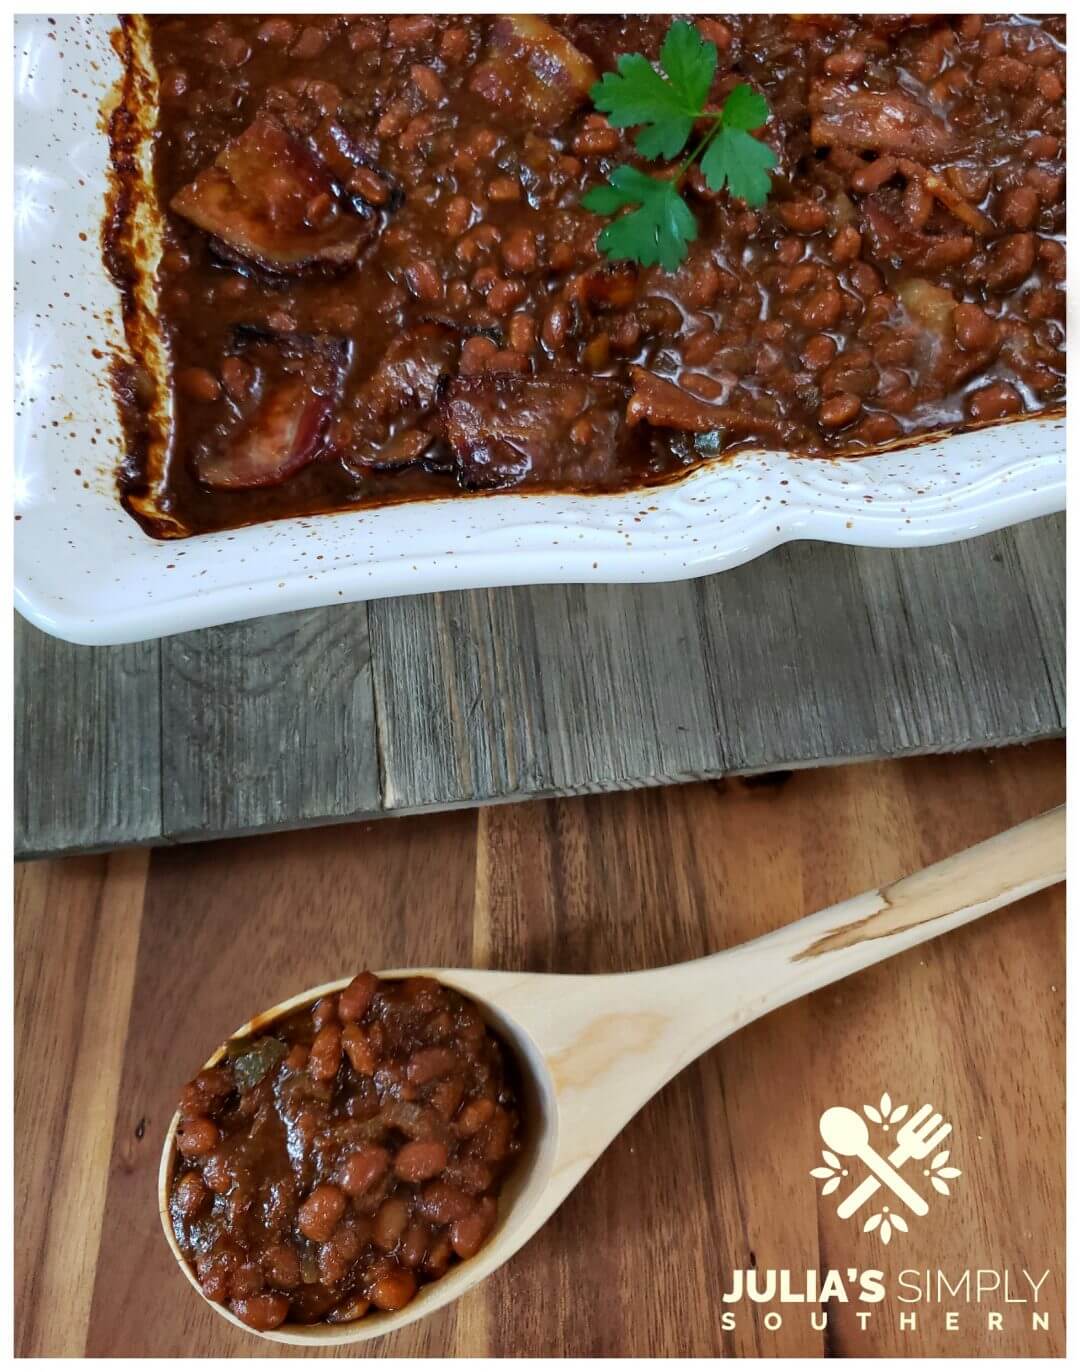 Best Southern Style Baked Beans Recipe - Julias Simply Southern